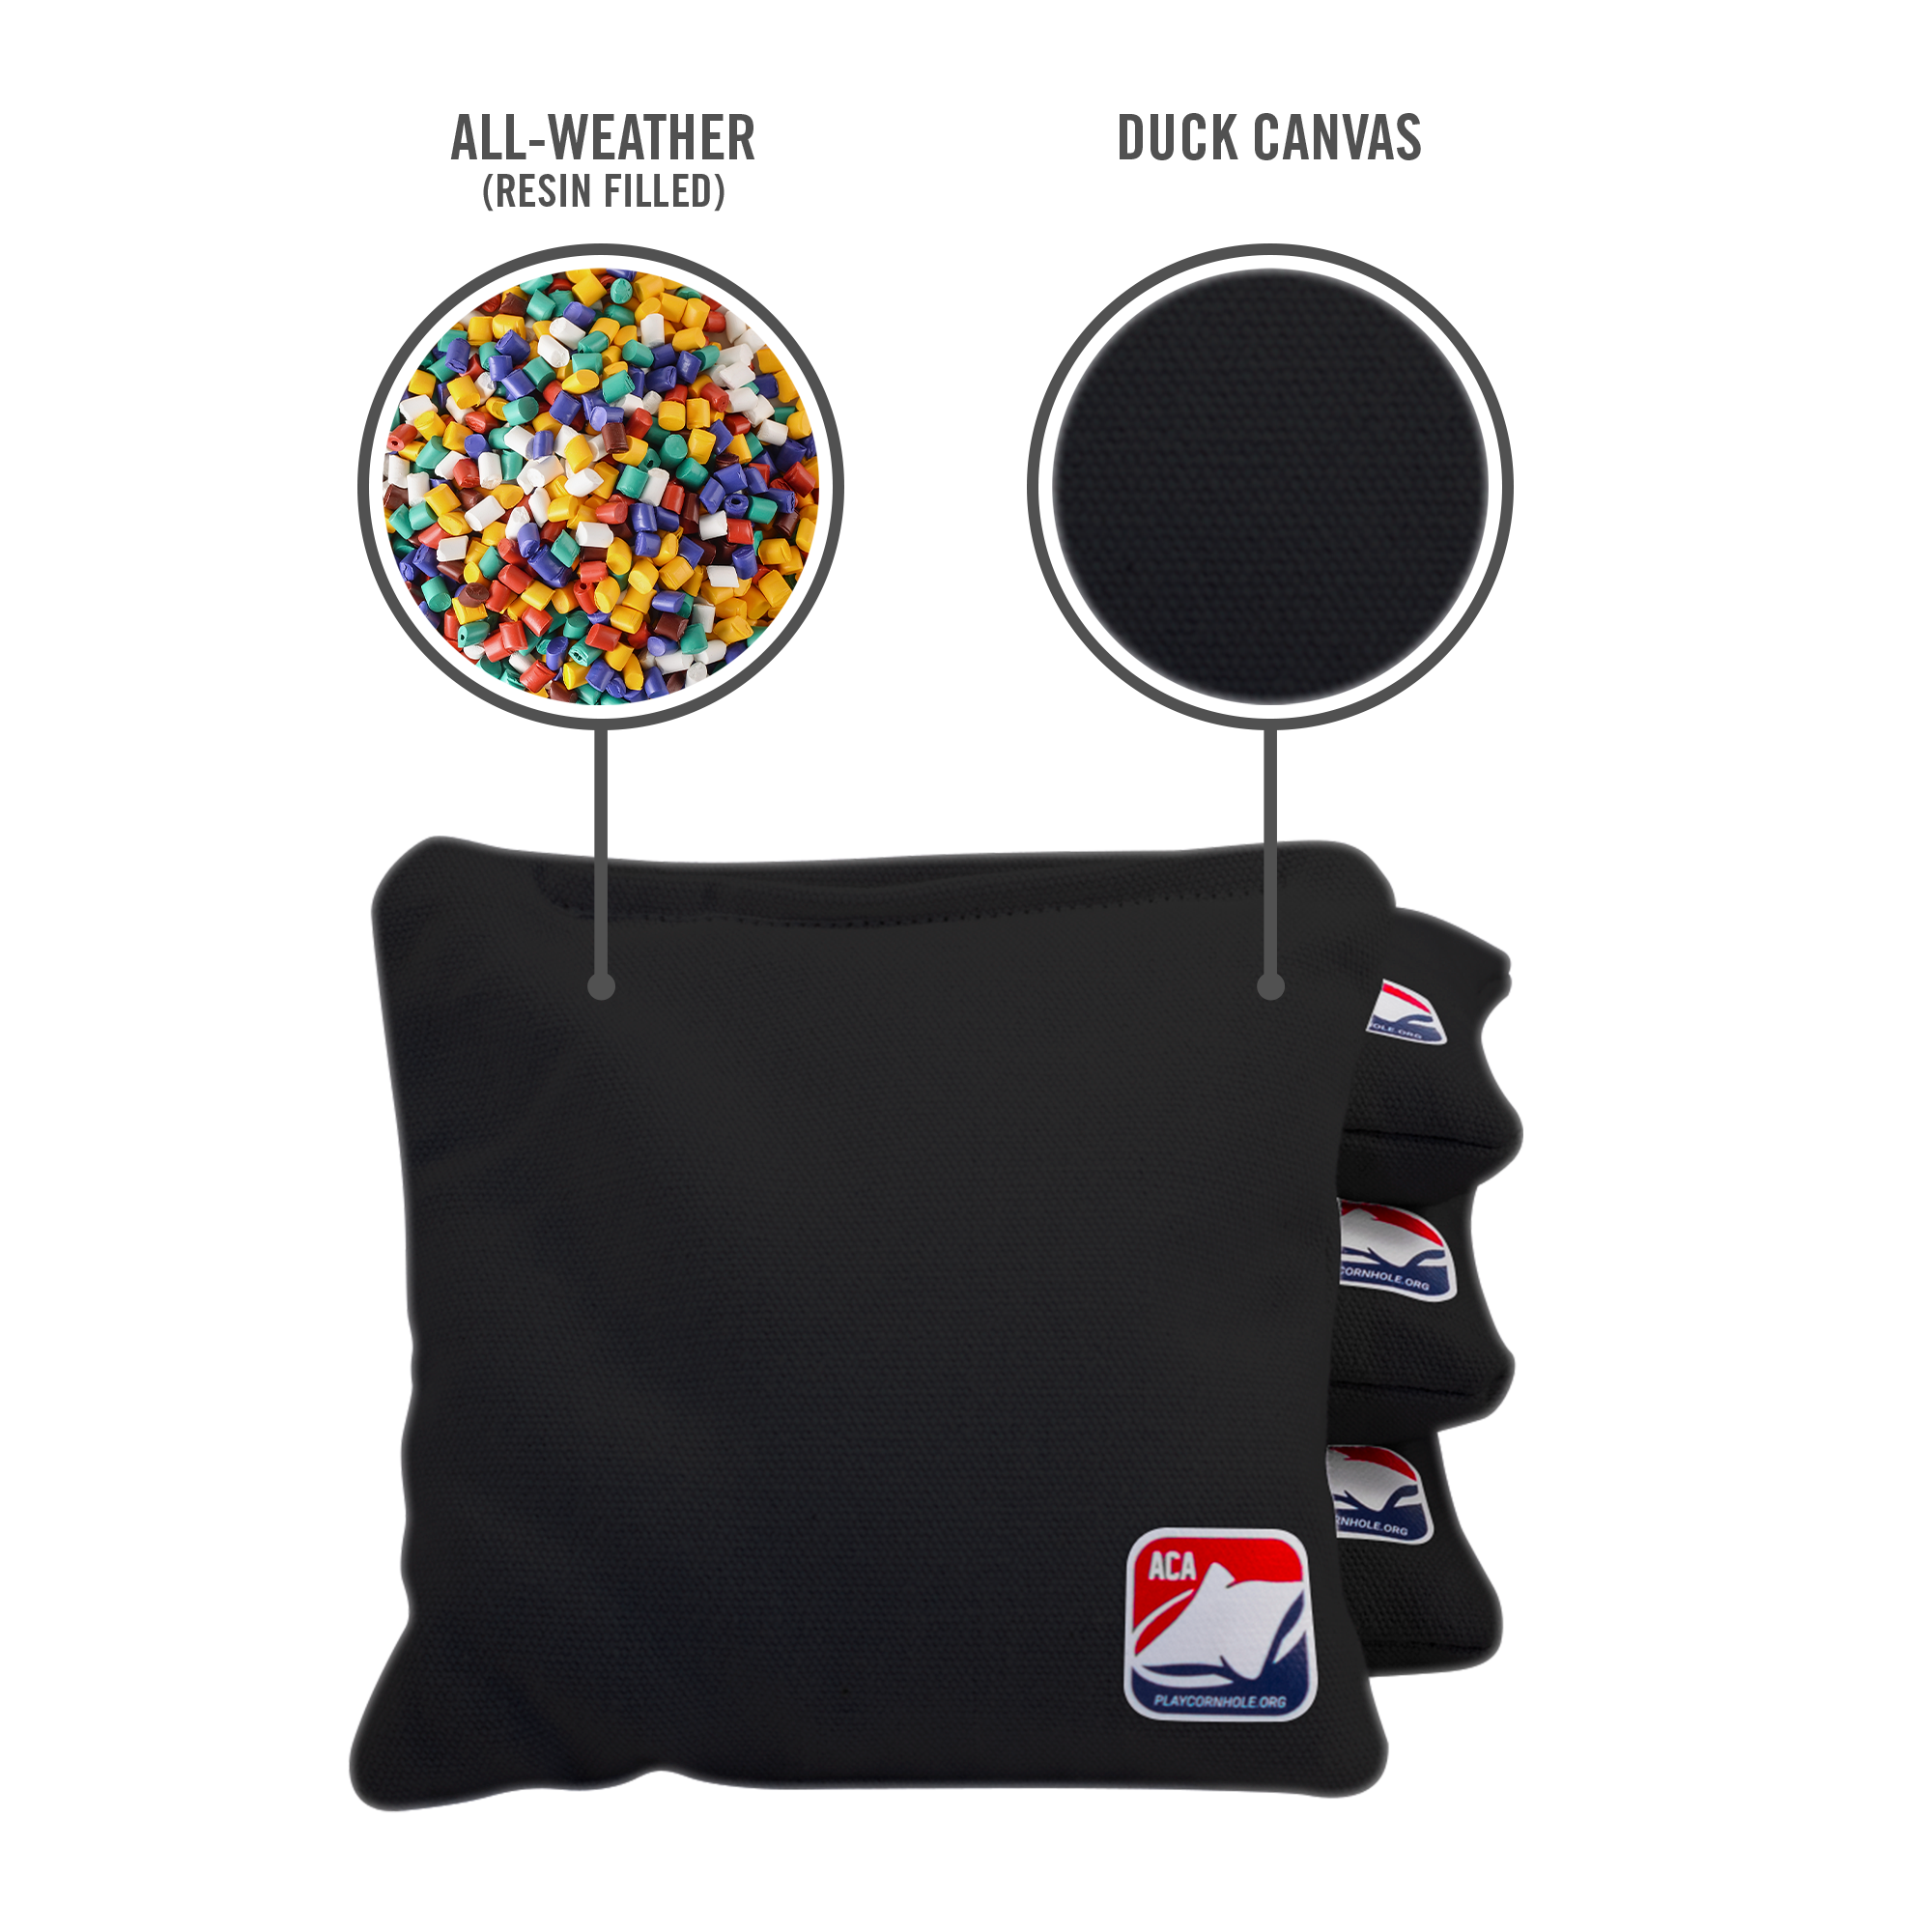 6-in Daily 66x Black Competition Regulation Cornhole Bags